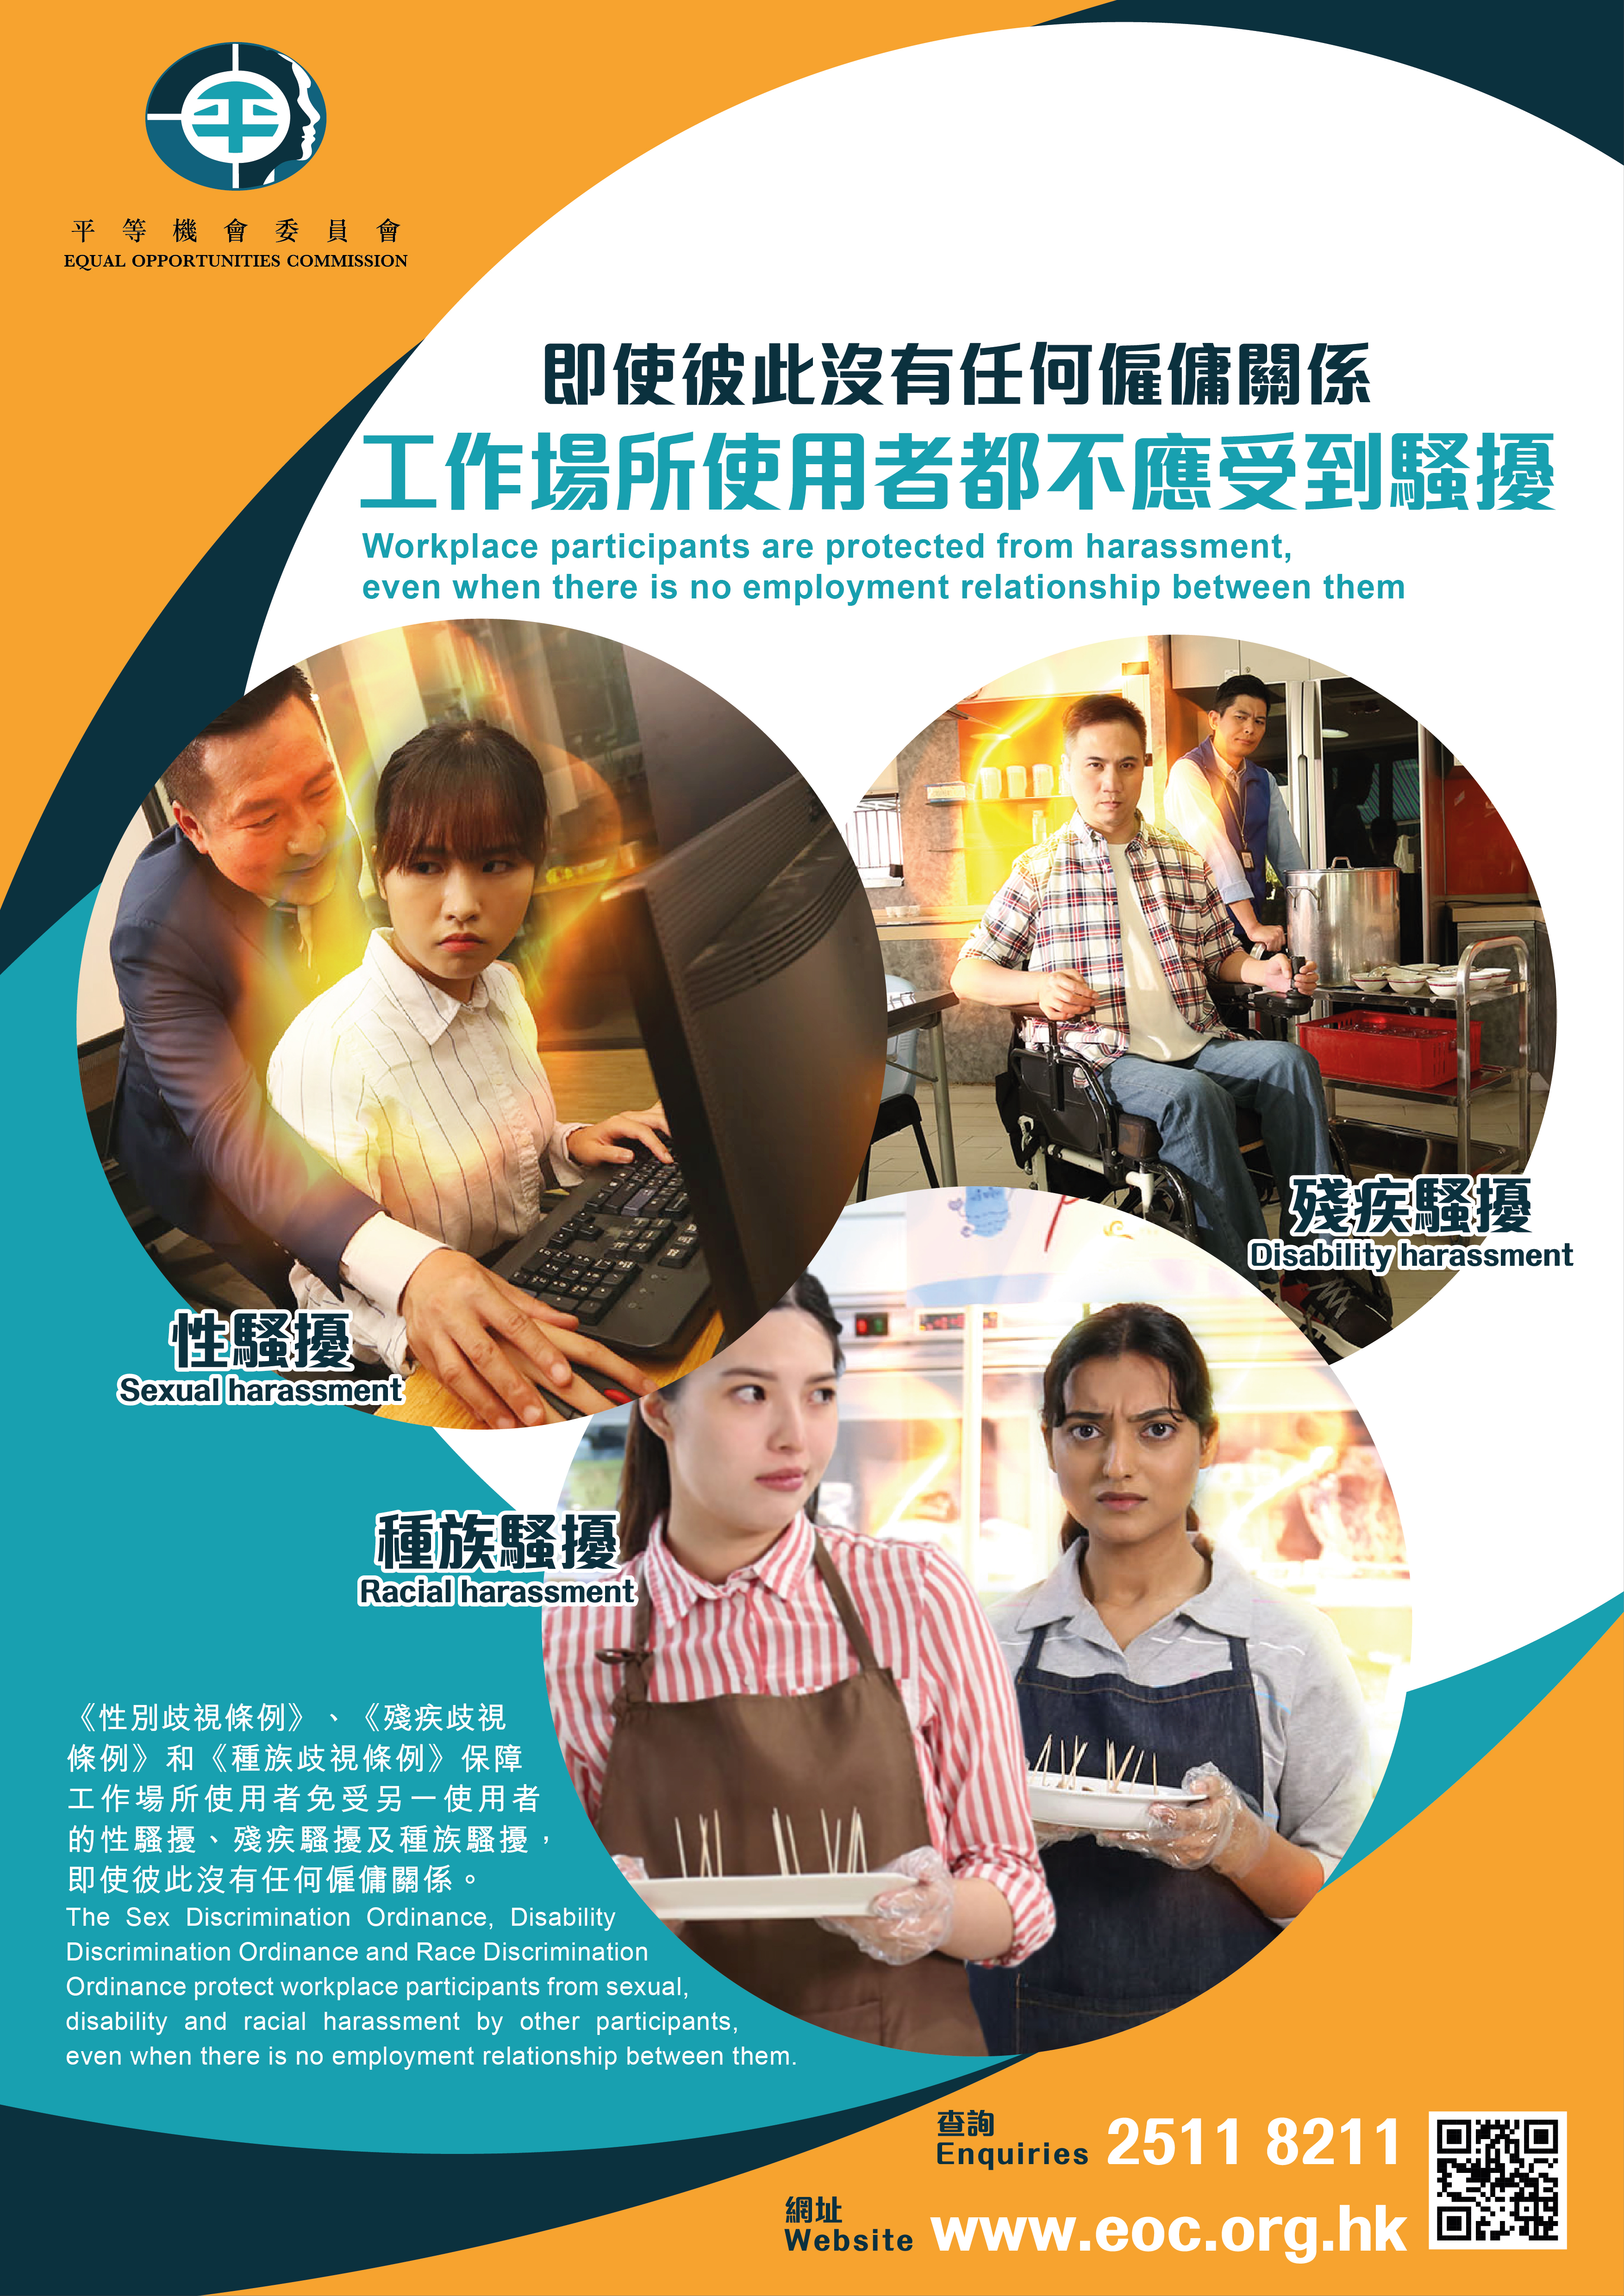 MTR poster about sexual, disability and racial harassment in common workplaces